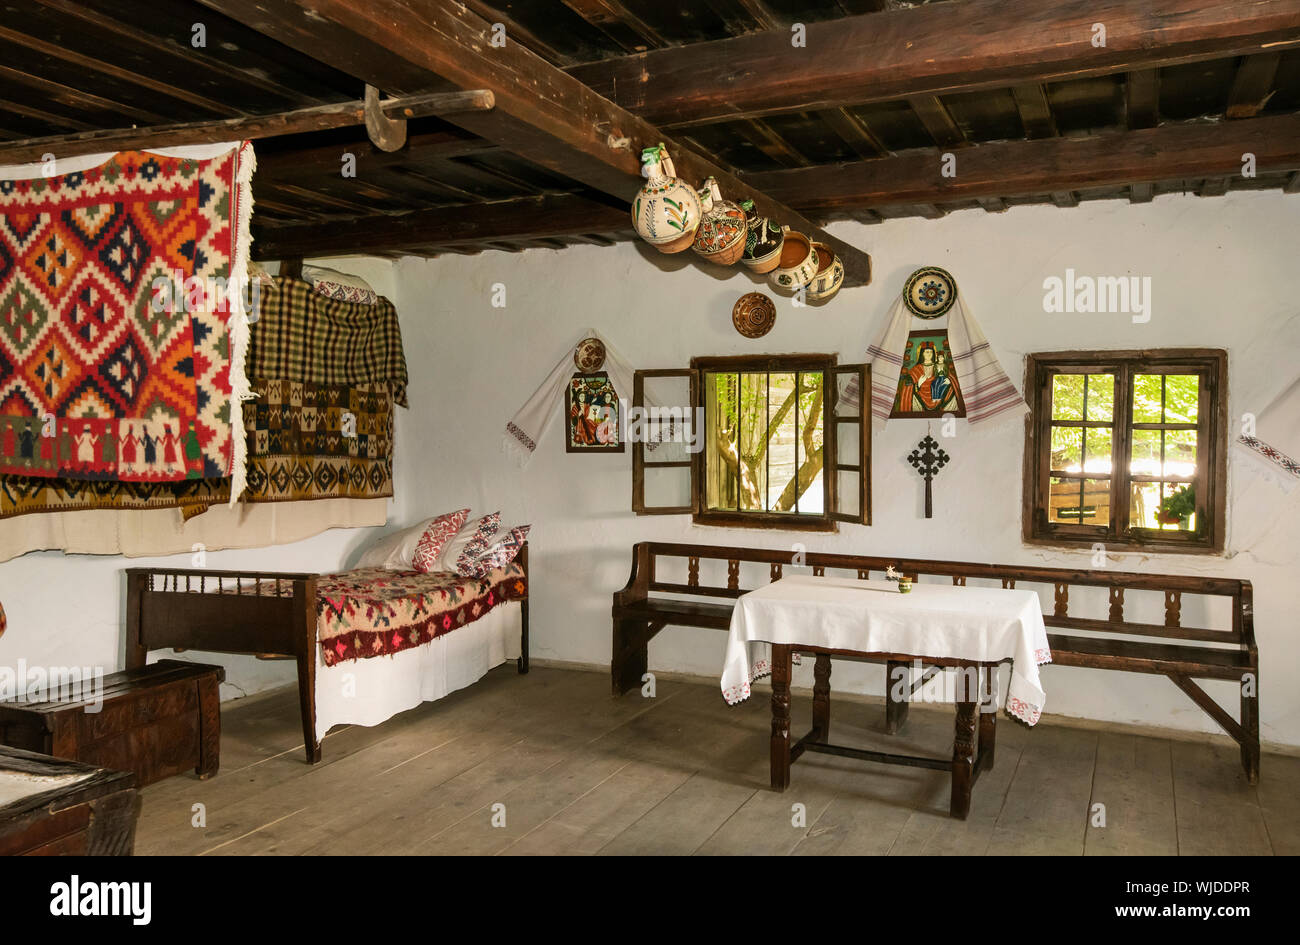 Interior of a house from Bancu, Harghita. National Village Museum at Herastrau Park, Bucharest. Romania Stock Photo